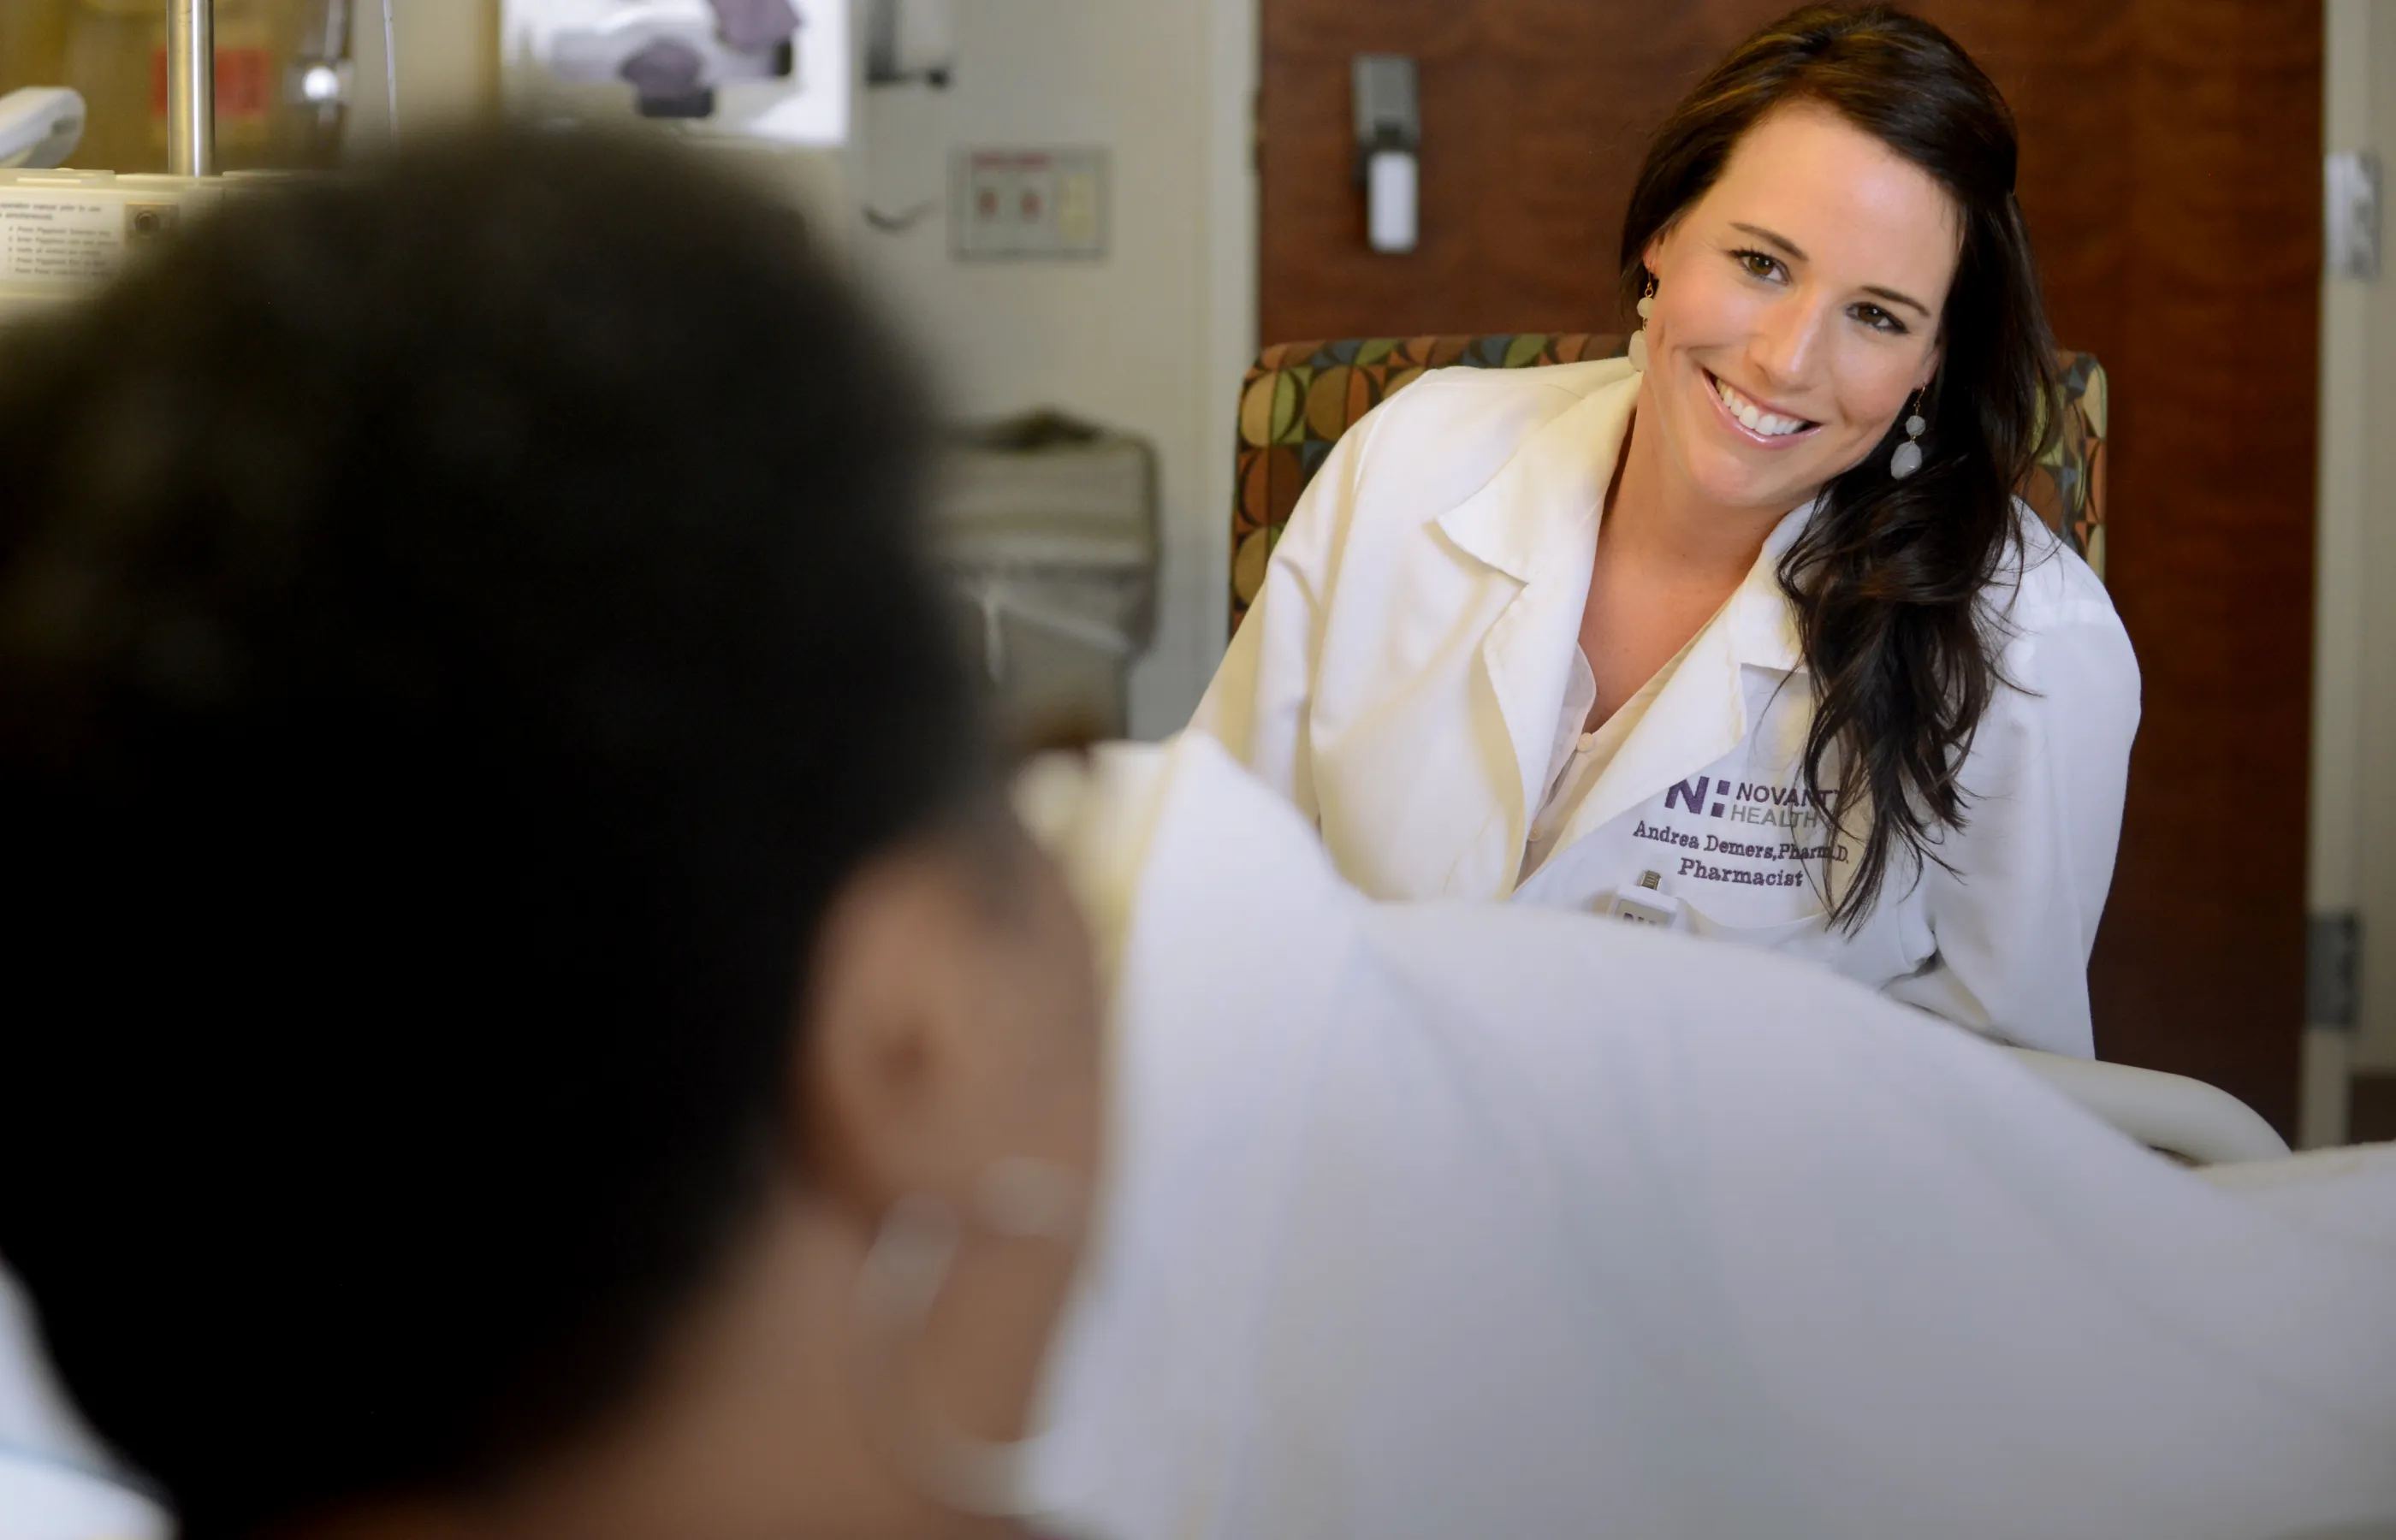 Novant Health pharmacist, Dr. Demera, is sitting at the bedside of a patient talking and smiling. 